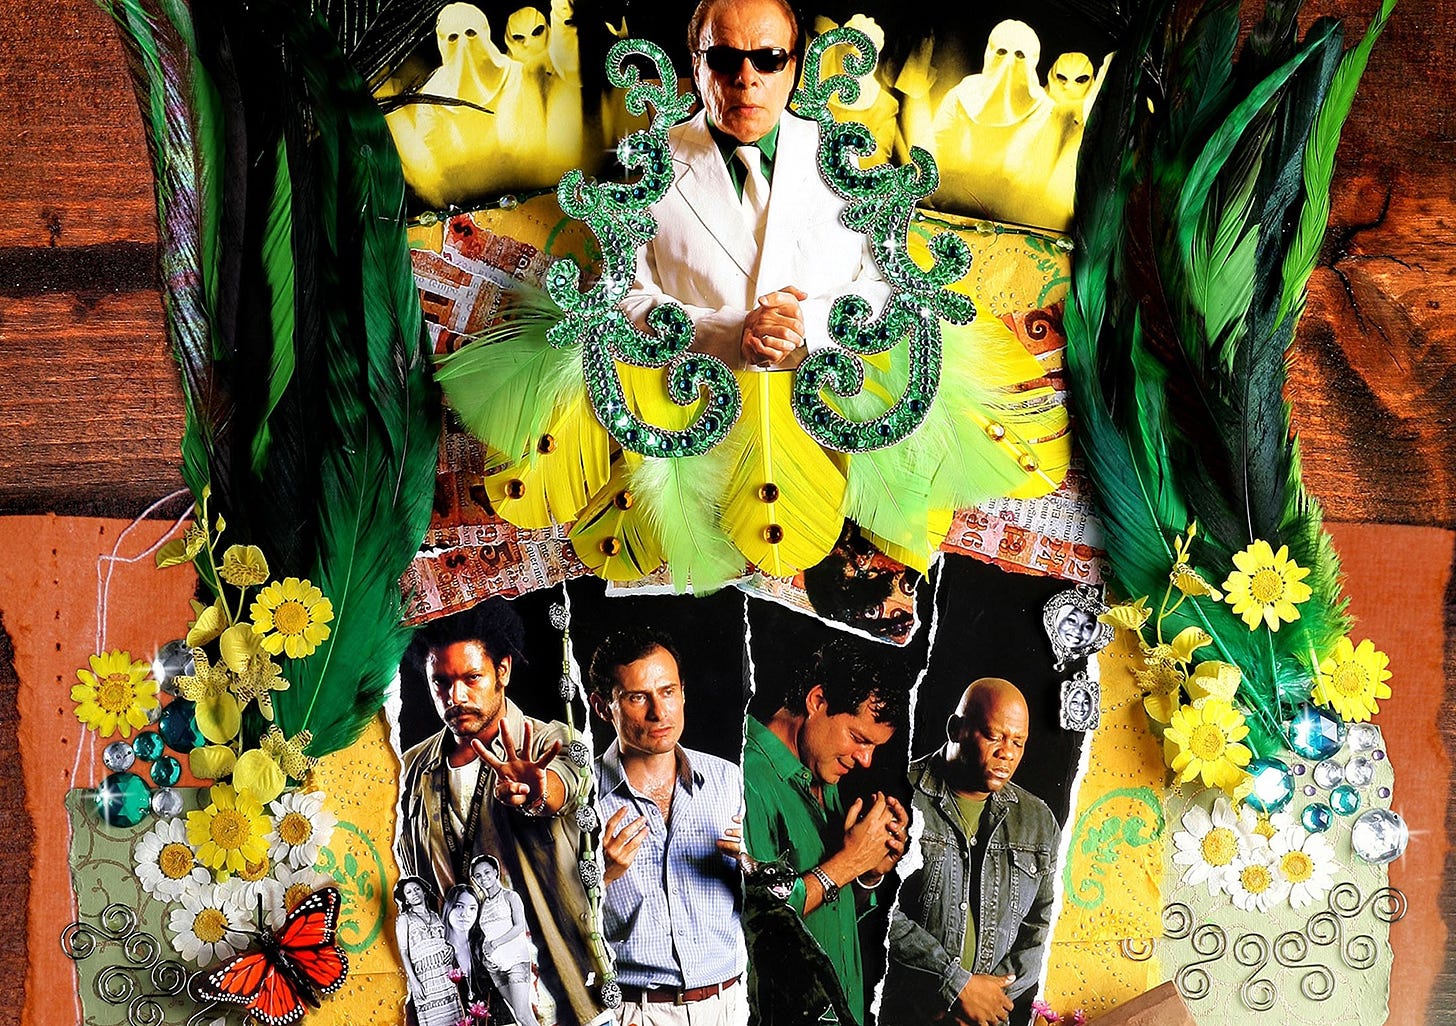 A poster for HBO's FILHOS DO CARNAVAL, featuring pictures of the characters arranged in an ensemble of feathers and flowers meant to resemble a carnival costume